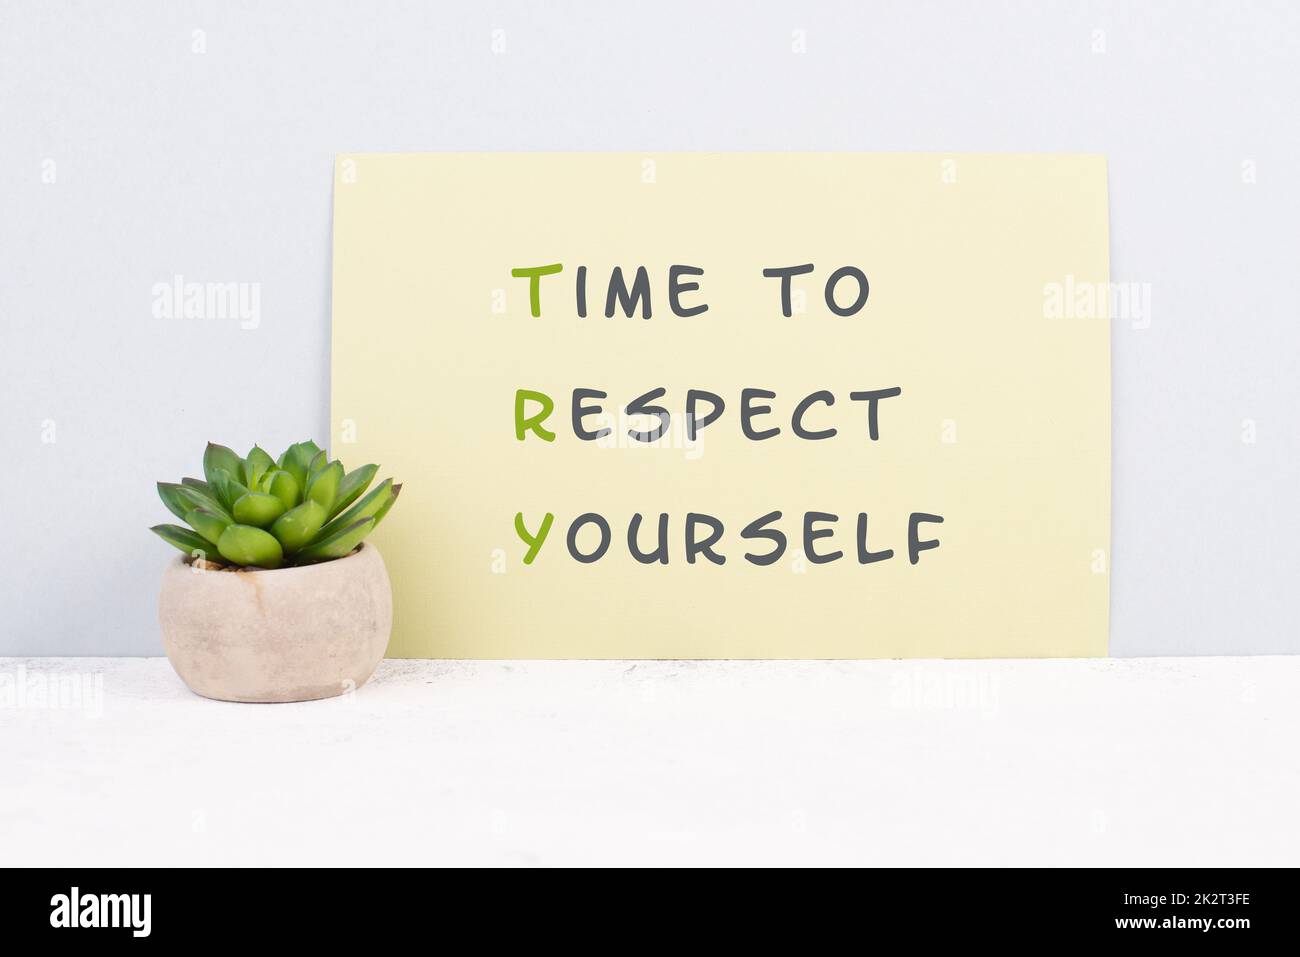 The words time to respect yourself are standing on paper, responsibility and development, motivation concept, cactus plant beside the message Stock Photo